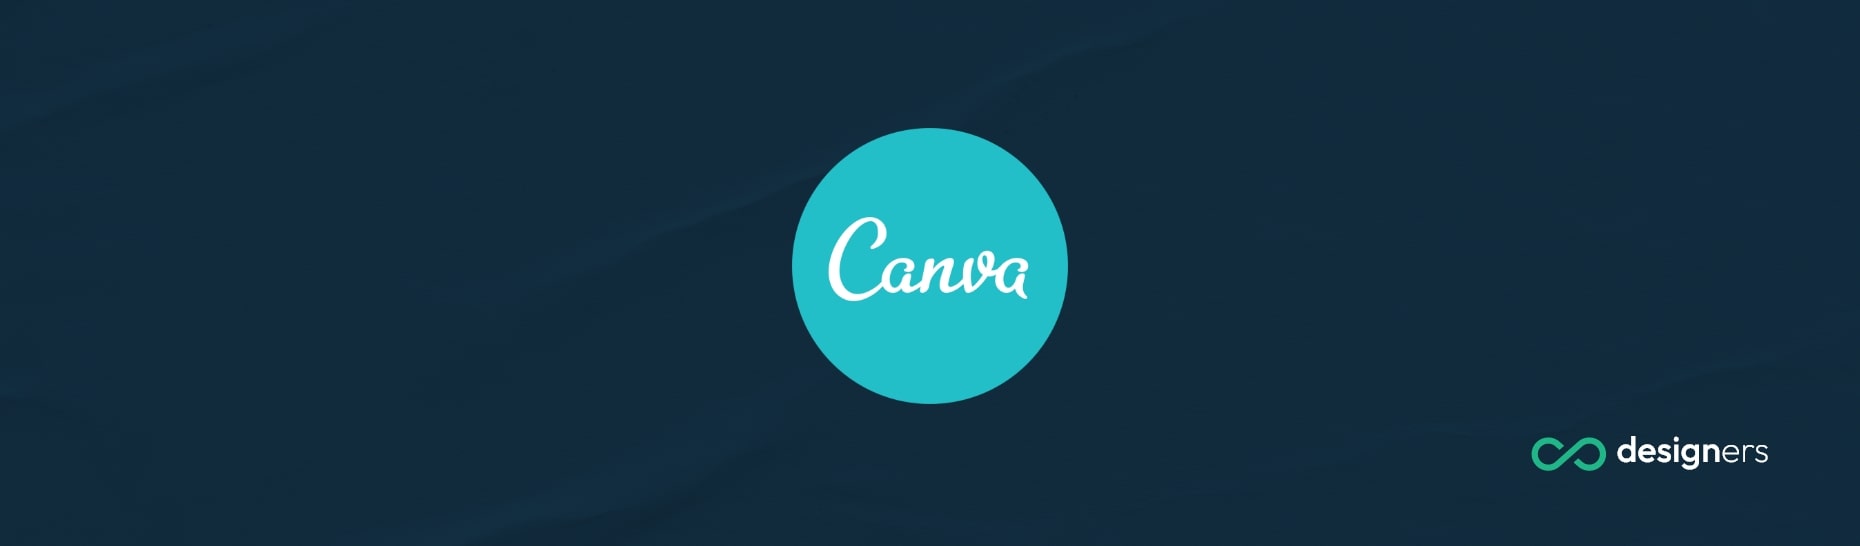 Does Canva Have Grid Lines?